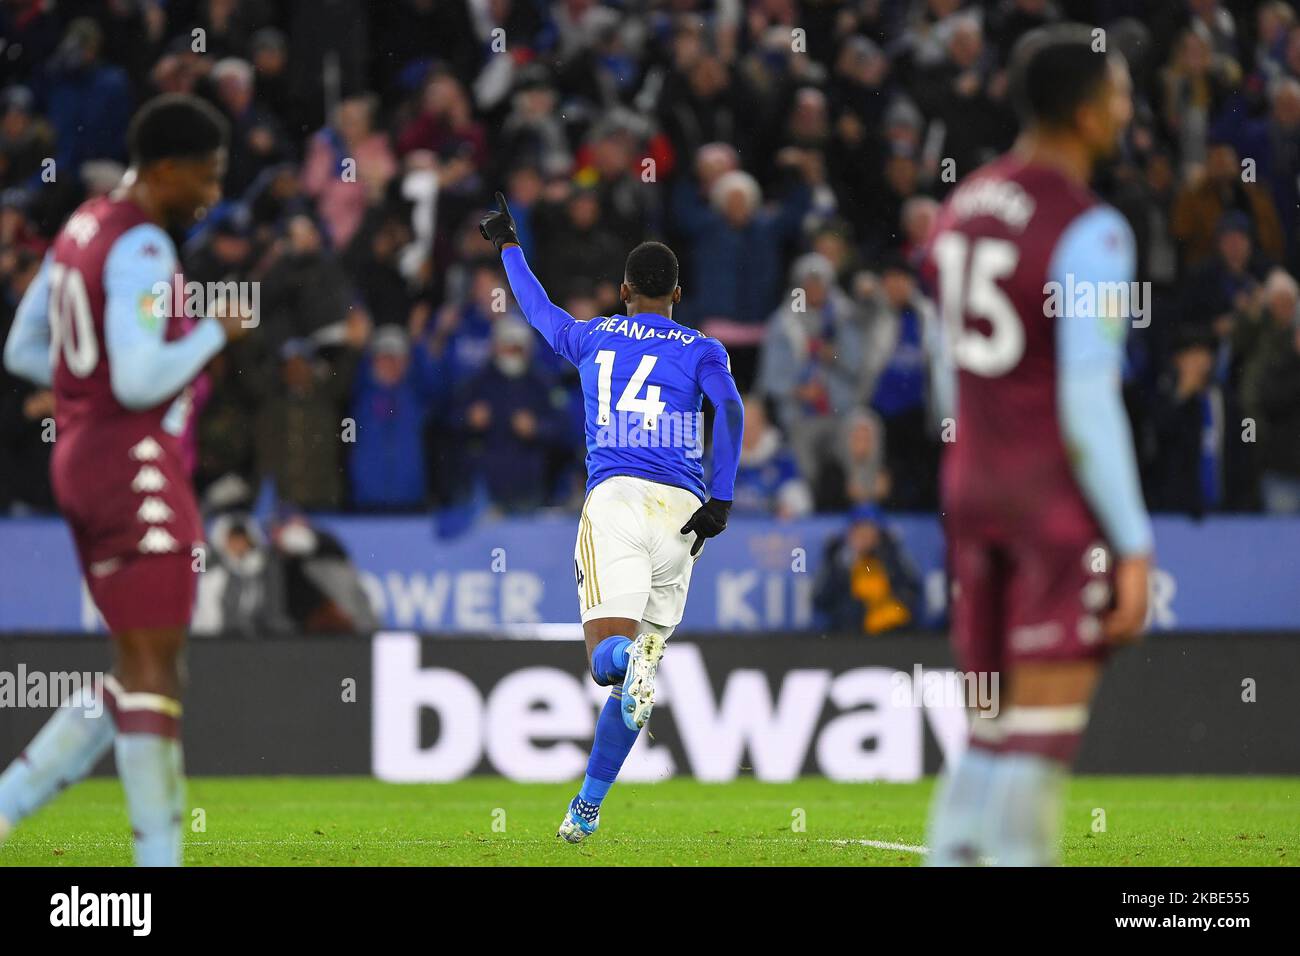 Kelechi Iheanacho (14) of Leicester City celebrates after scoring a goal to make it 1-1 during the Carabao Cup Semi Final 1st Leg between Leicester City and Aston Villa at the King Power Stadium, Leicester on Wednesday 8th January 2020. (Photo by Jon Hobley/MI News/NurPhoto) Stock Photo